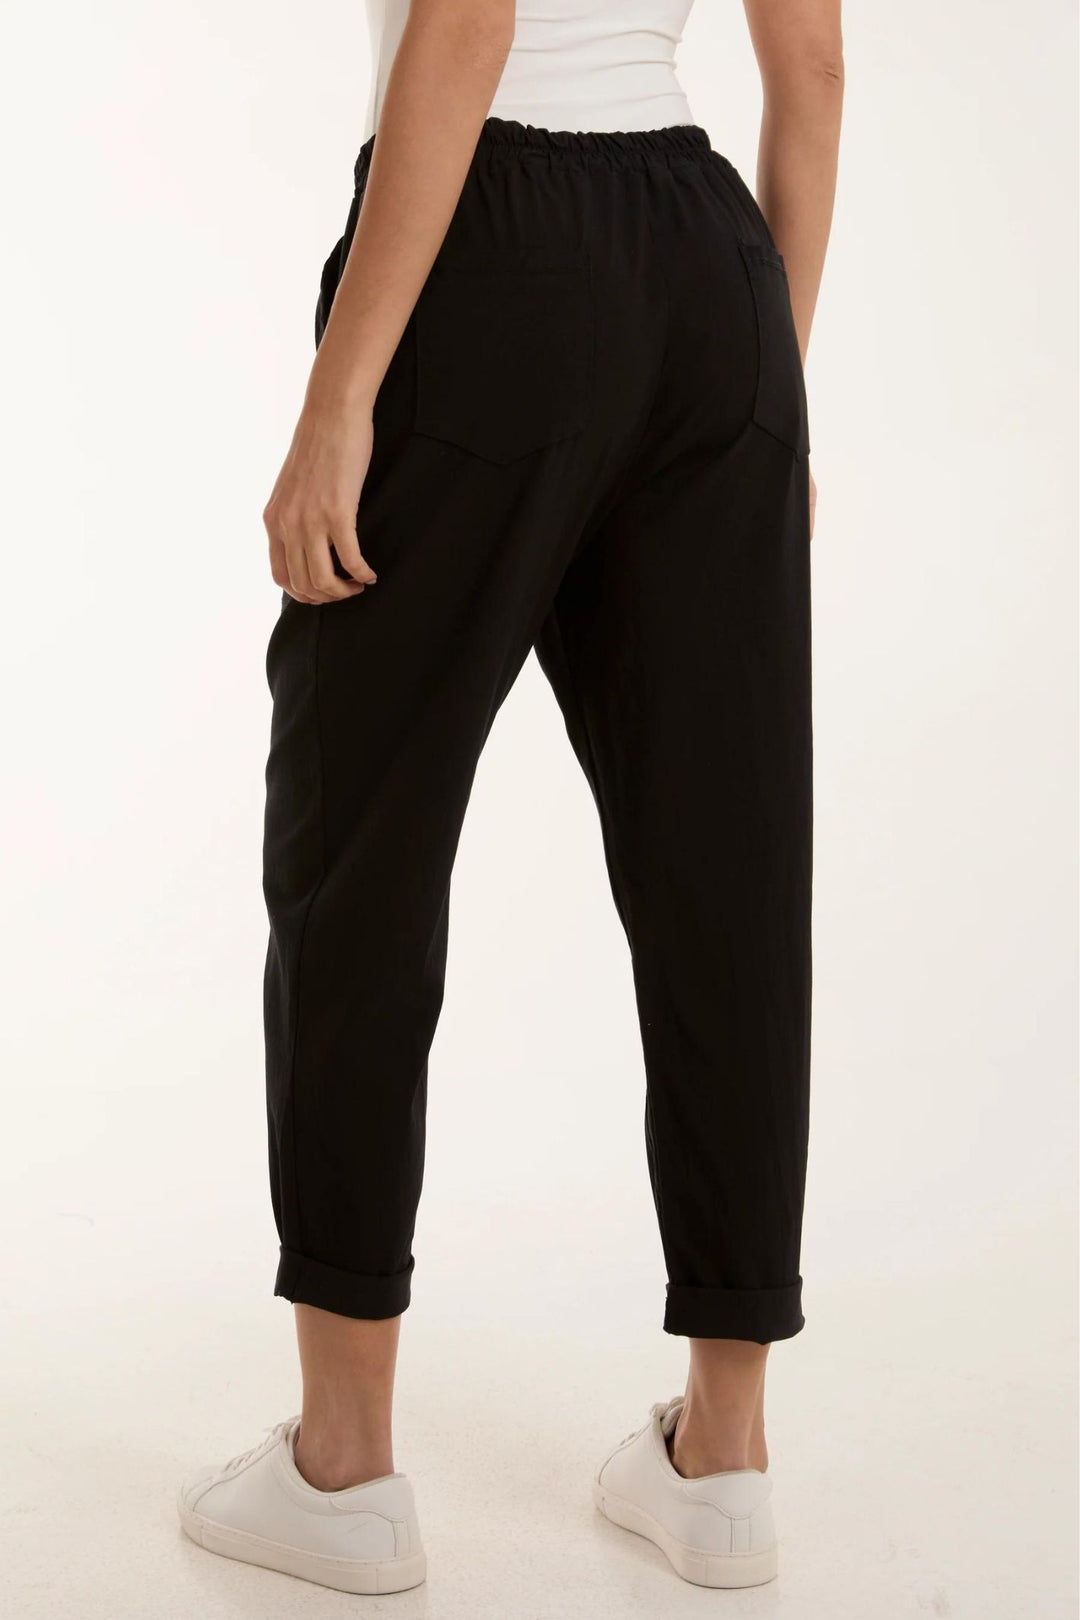 Black Contour Detail Stretch Pull-On Trousers XL